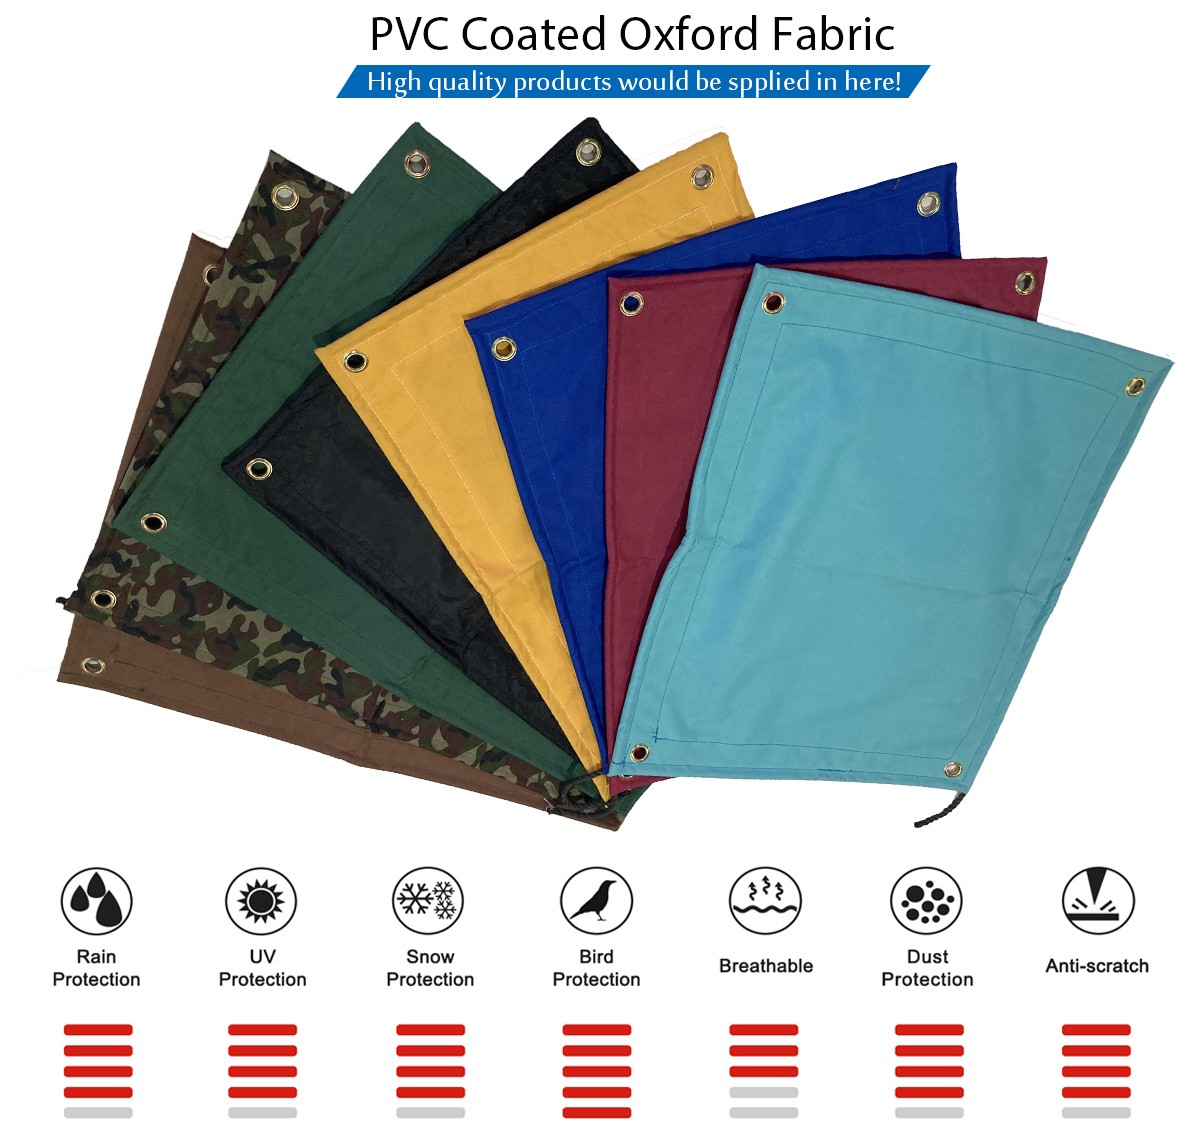 Dark Blue PVC coated oxford fabric for bag